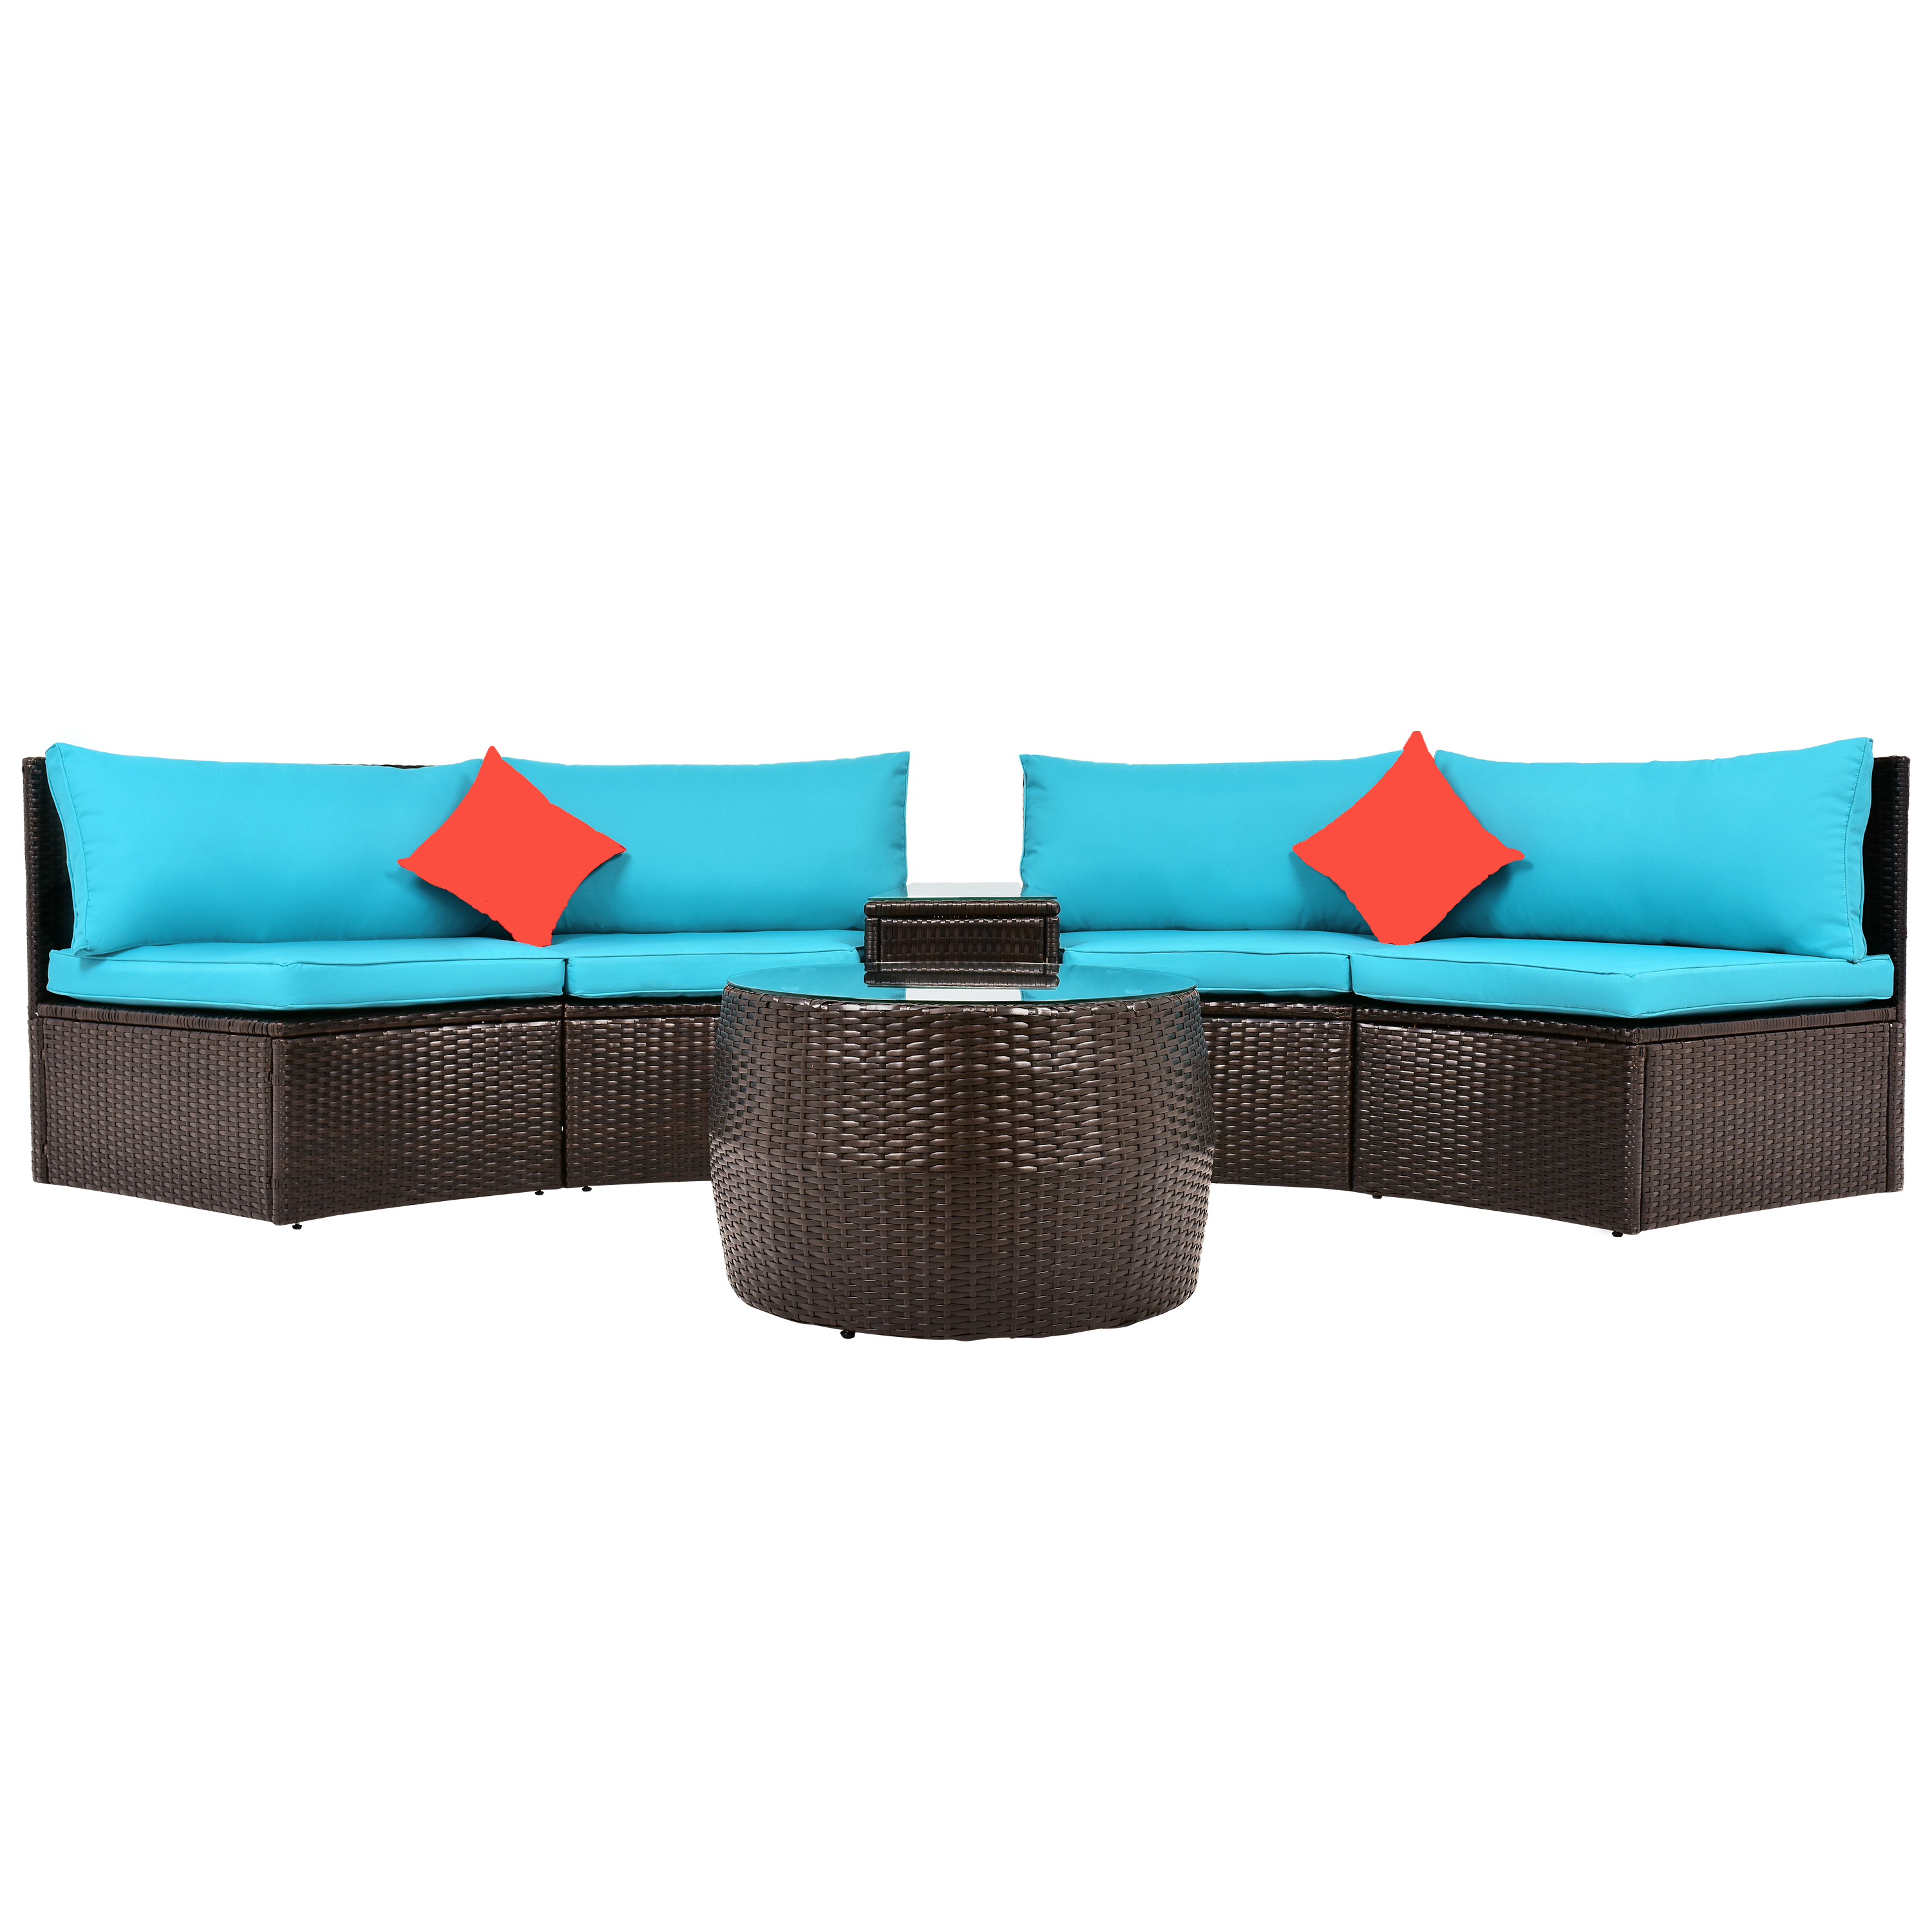  4-Piece Patio Furniture Sets, Outdoor Half-Moon Sectional Furniture Wicker Sofa Set with Two Pillows and Coffee Table, Blue Cushions+Brown Wicker-CASAINC